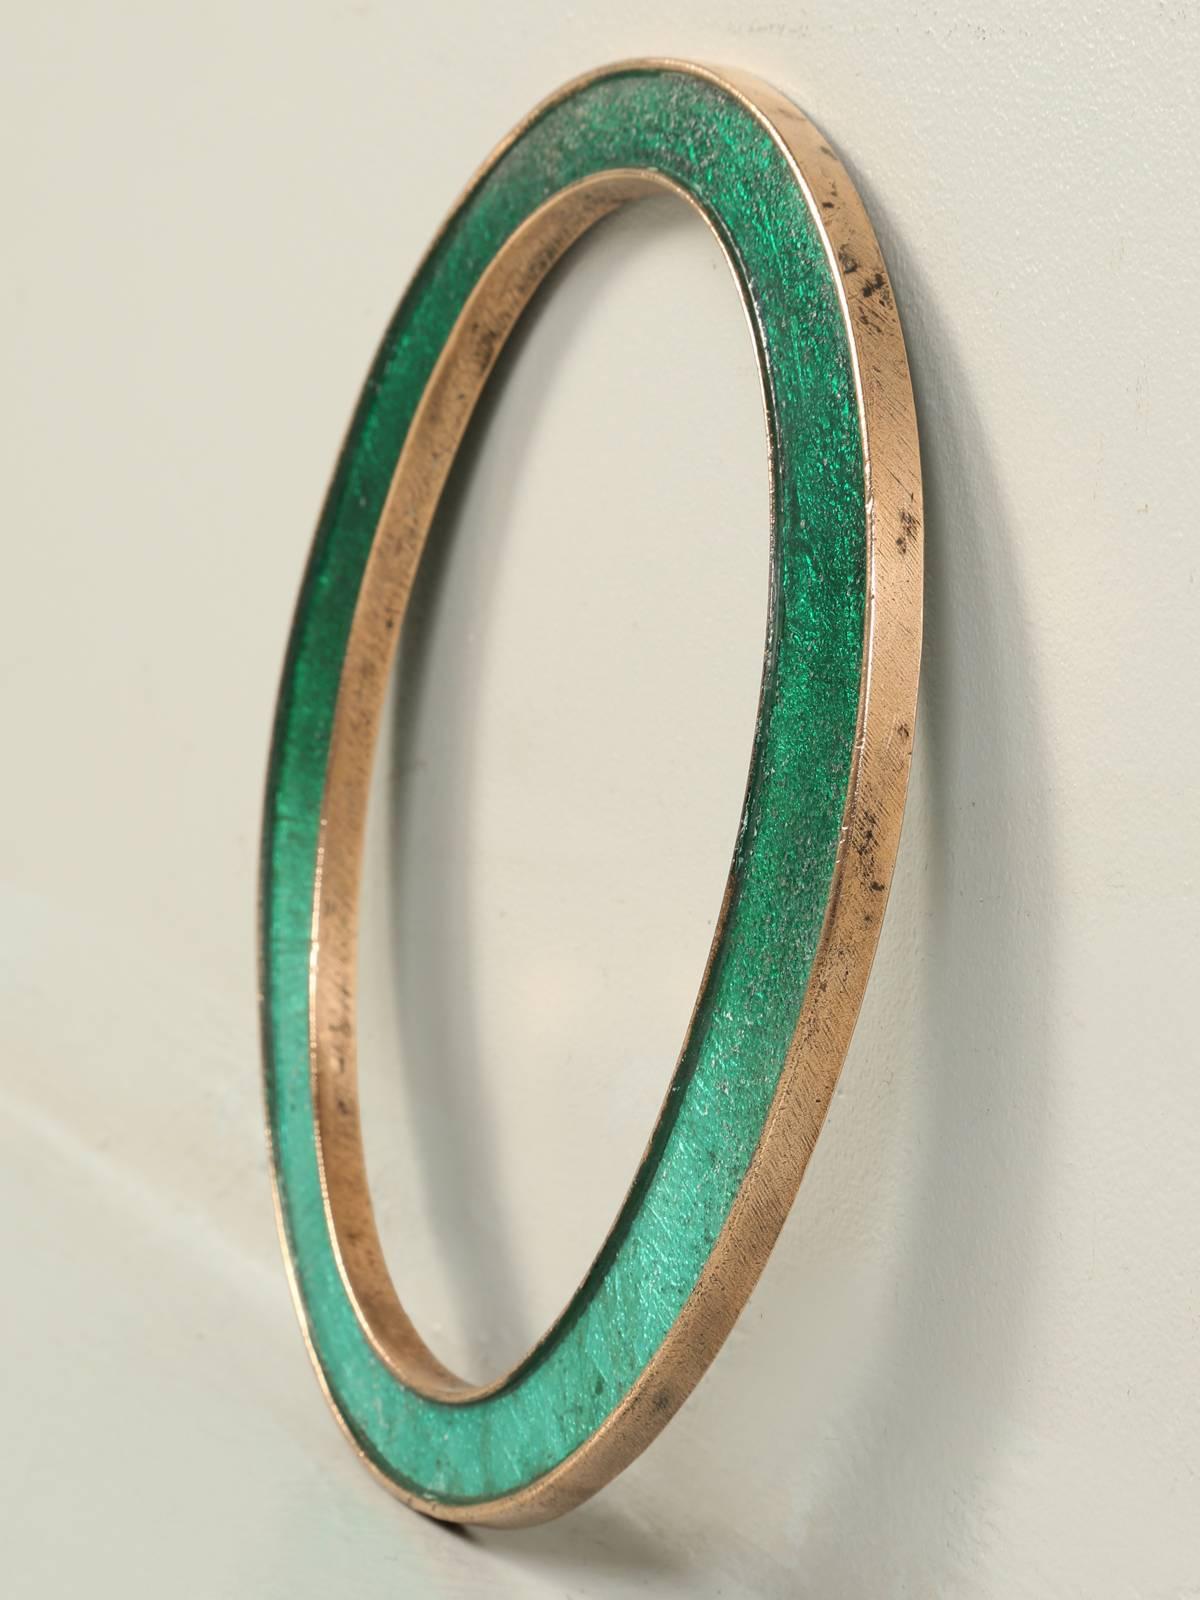 Beautifully made antique English solid cast copper letter “O”, with an emerald green enamel inlay.